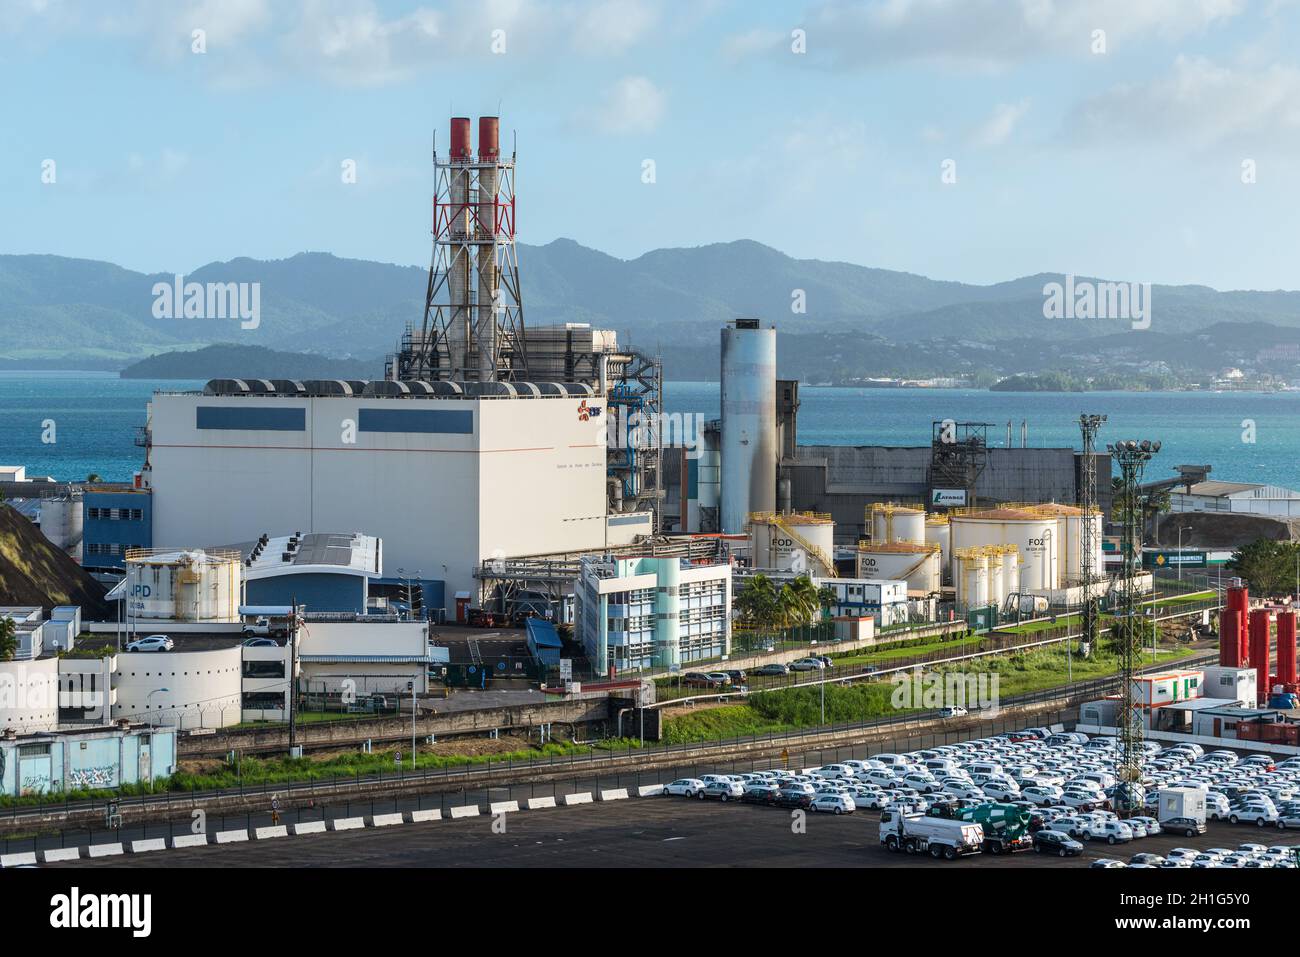 Fort-de-France, Martinique - December 19, 2016: Electrical power station (EDF - Electricite de France) and port infrastructure in Fort de France, the Stock Photo